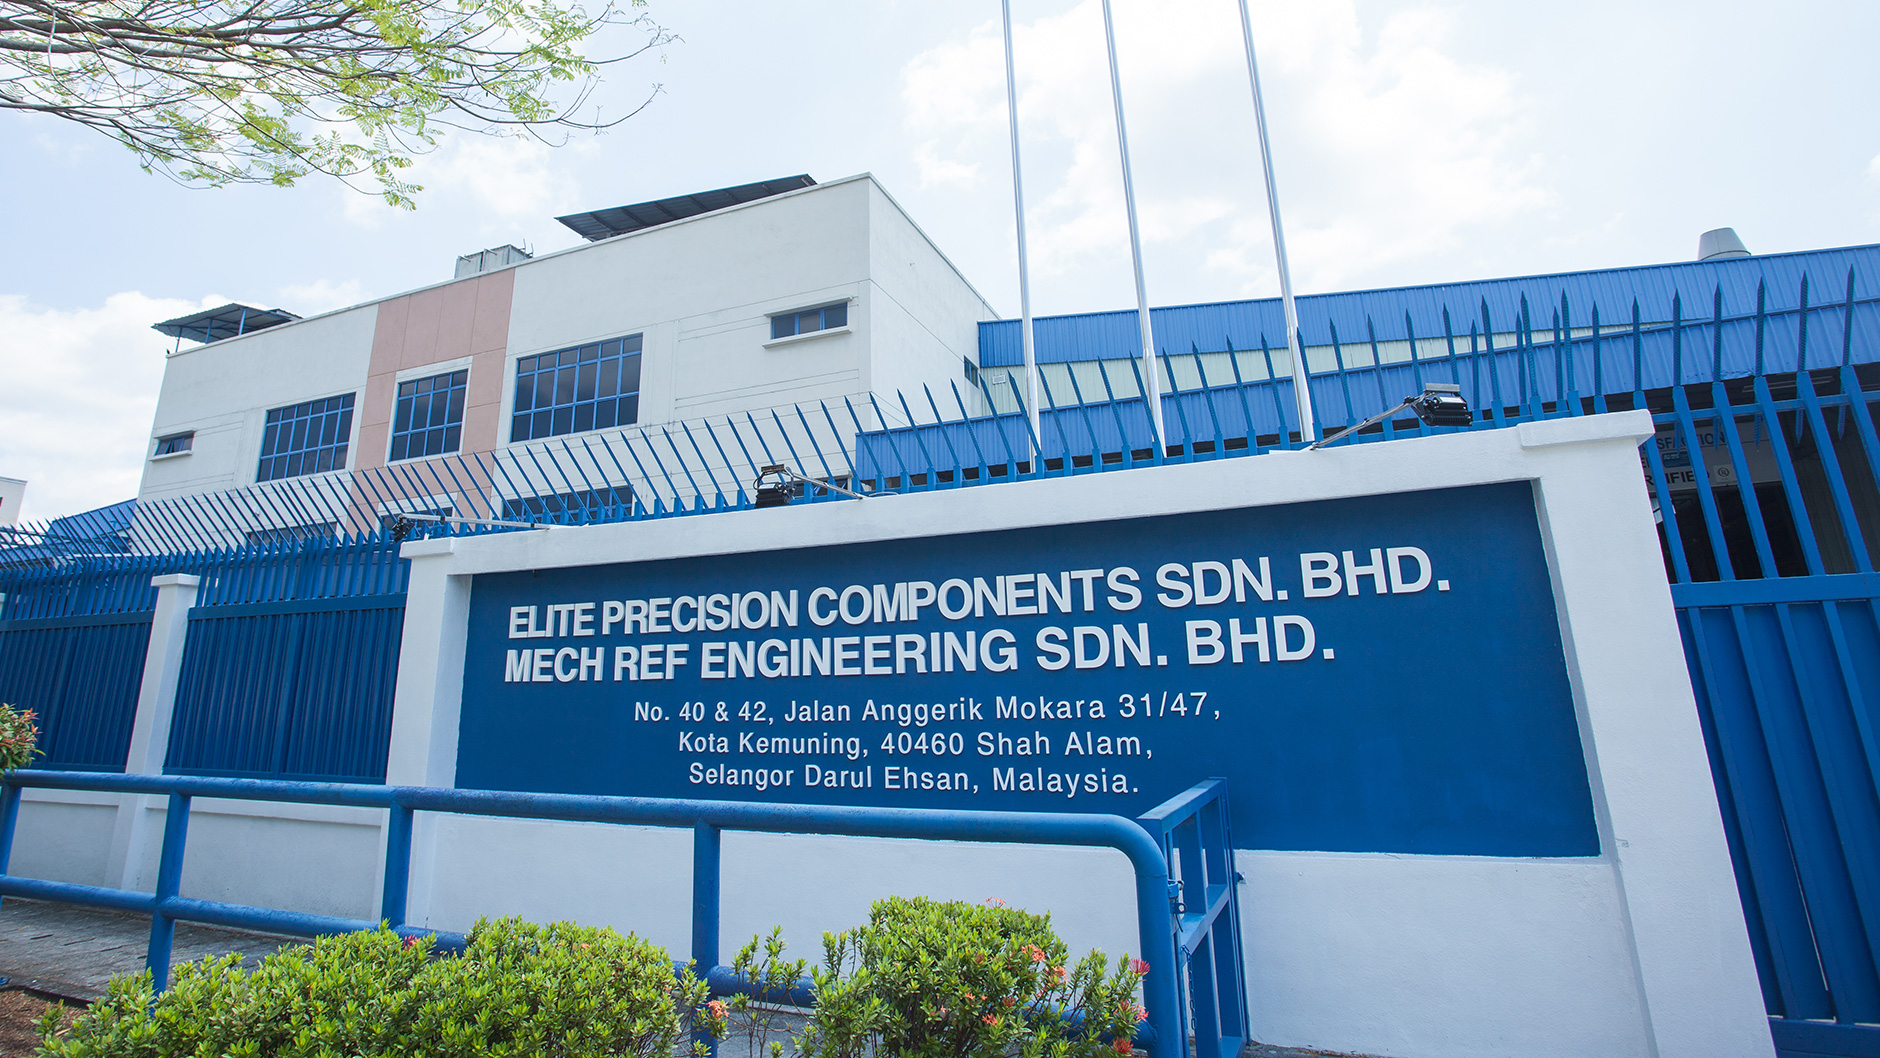 Mech Ref Engineering Sdn Bhd Company - Company Exterior View